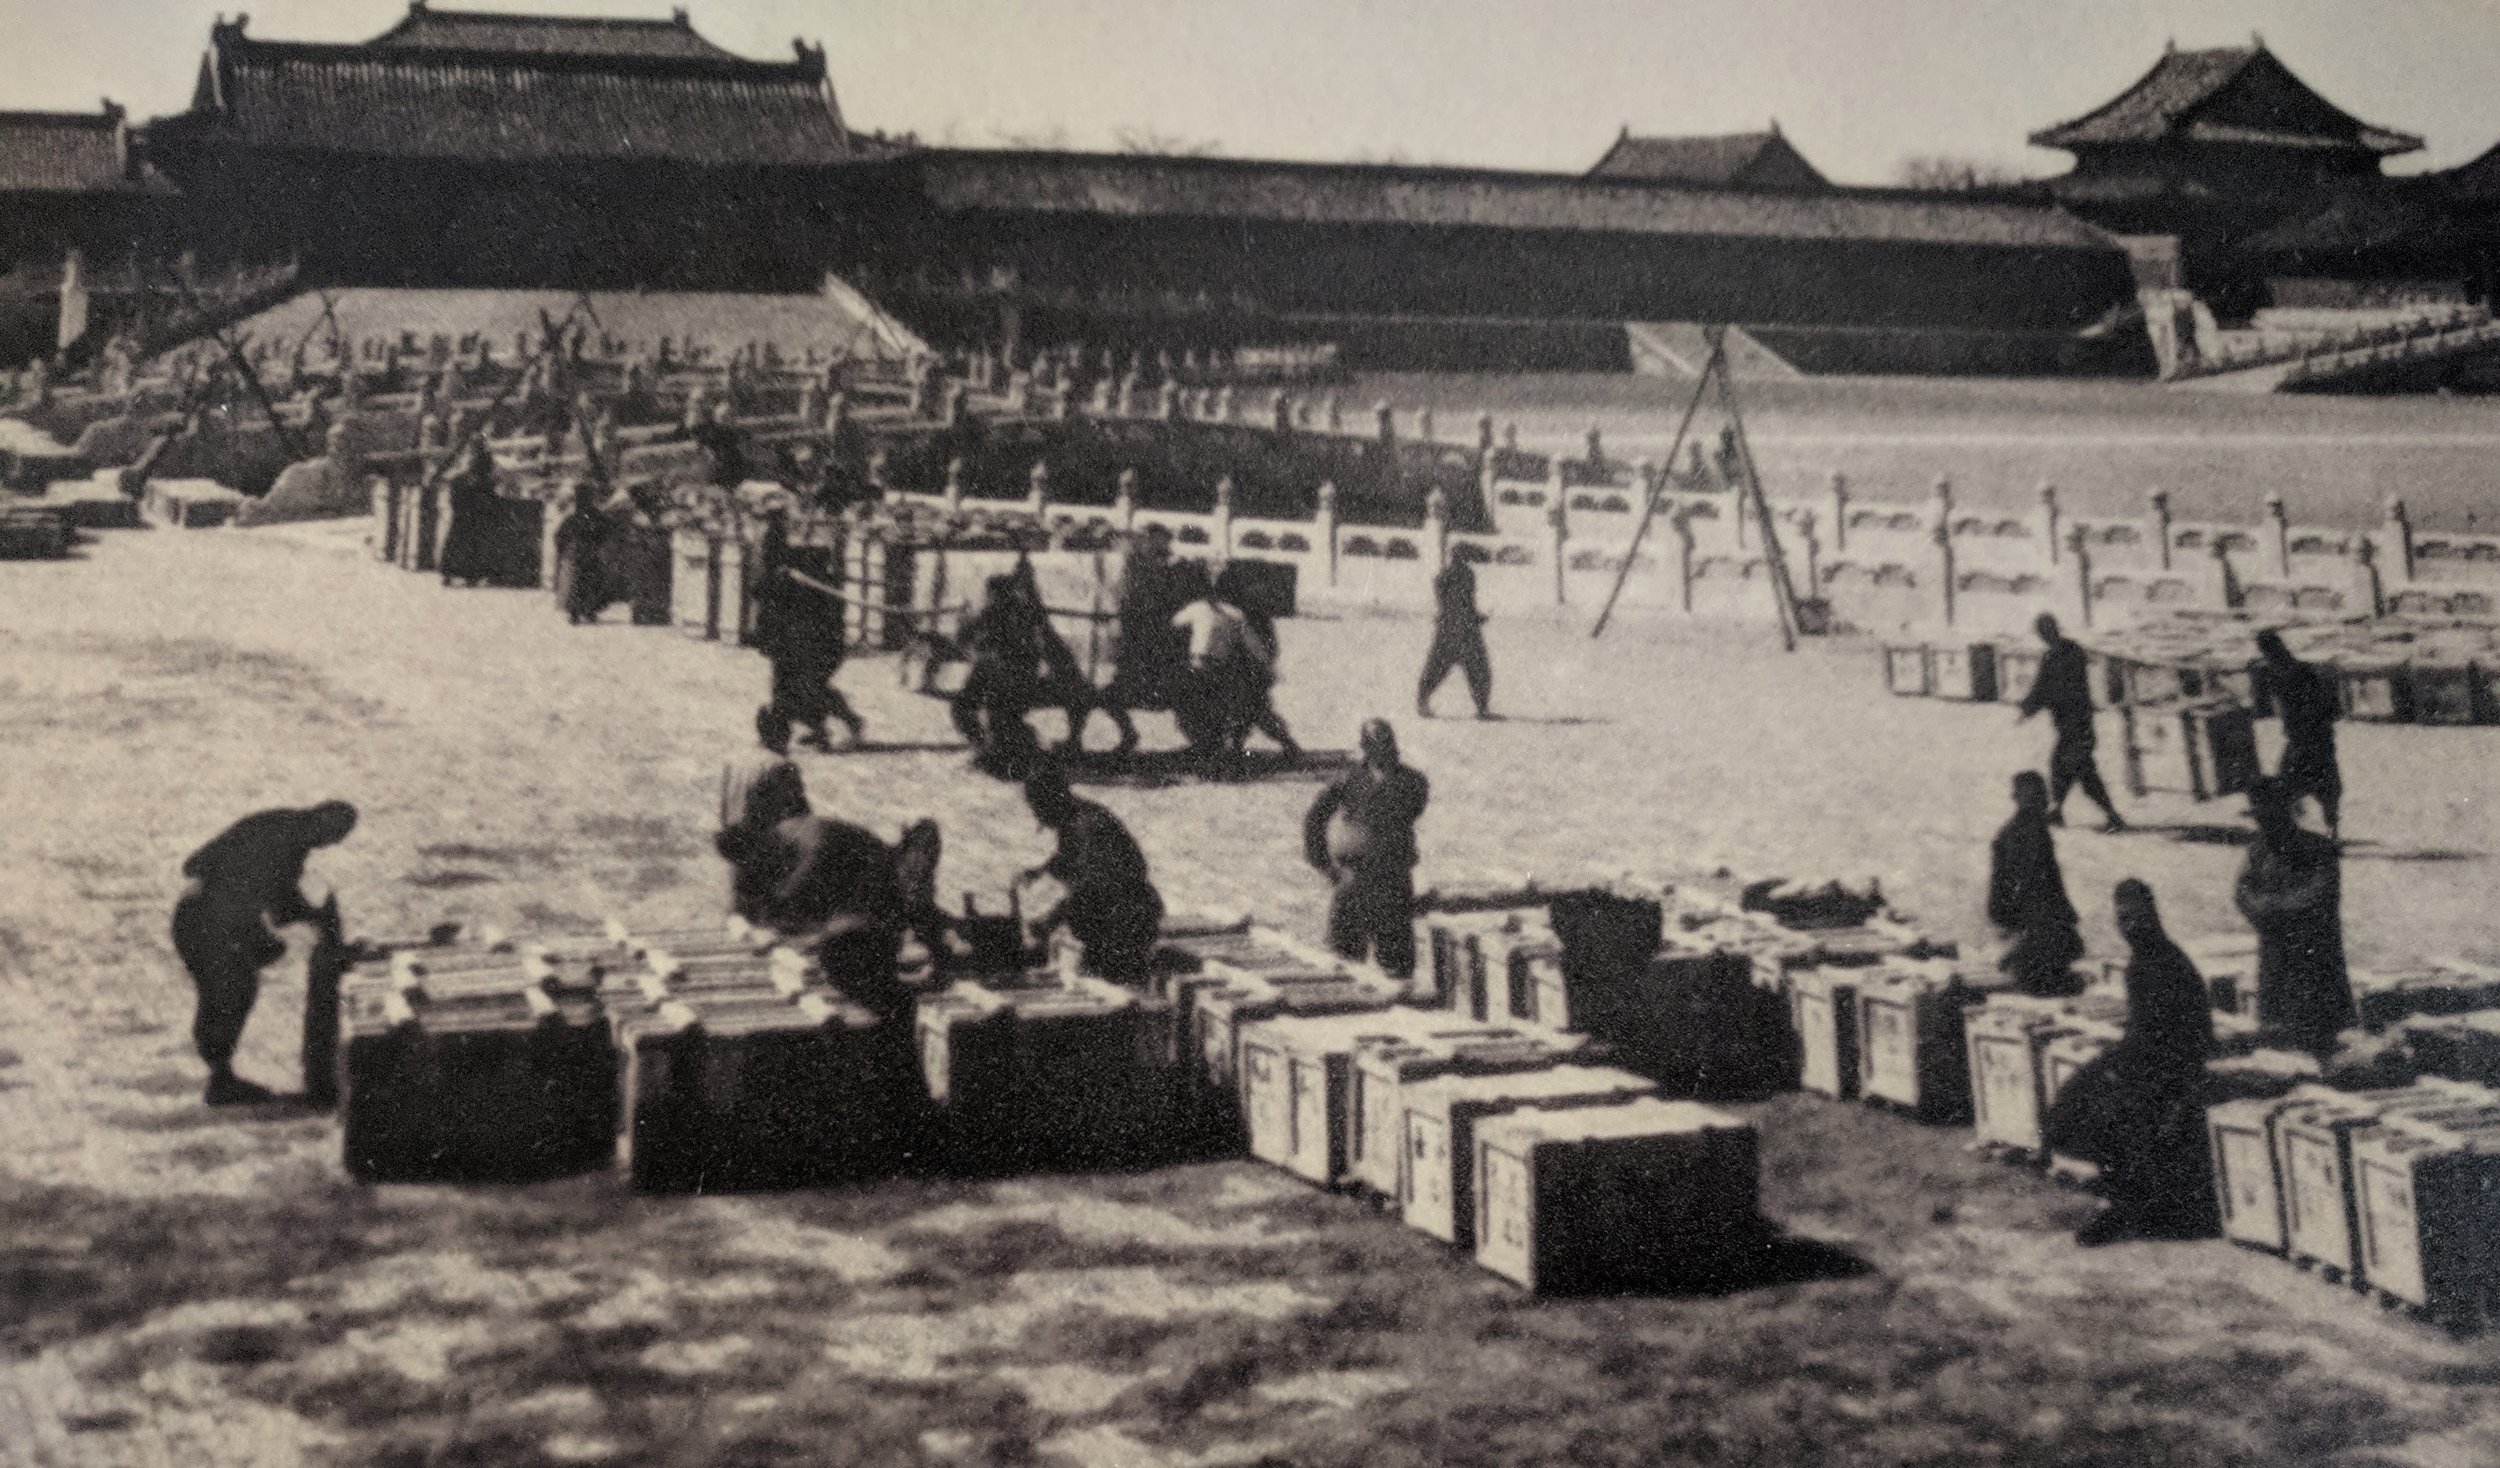  Cases awaiting evacuation in the Forbidden City, 1933					  					  					  					  					 